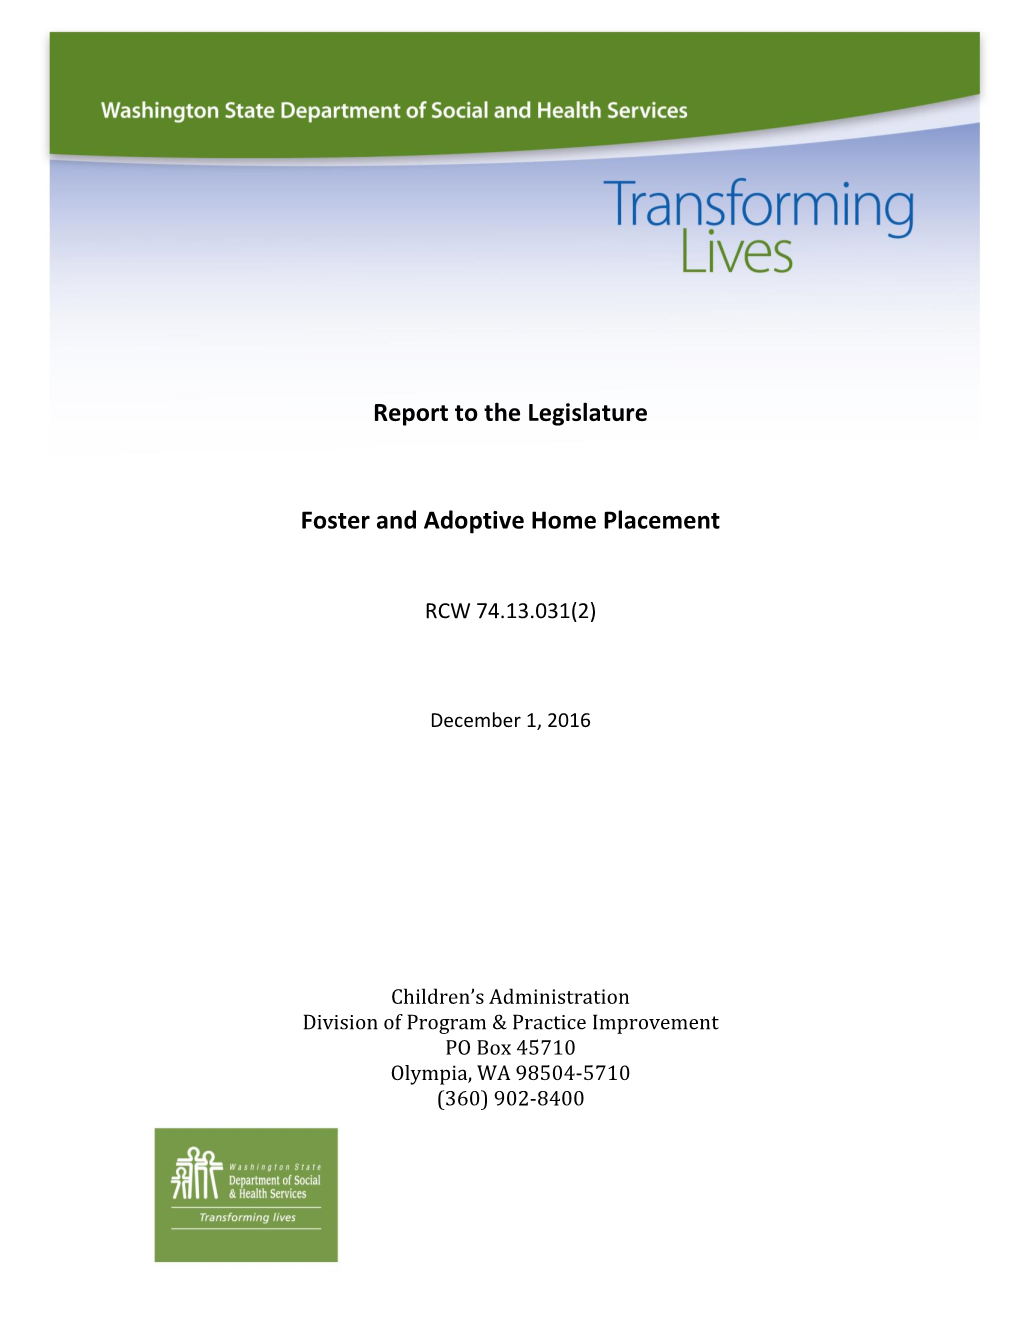 Report to the Legislature Foster and Adoptive Home Placement